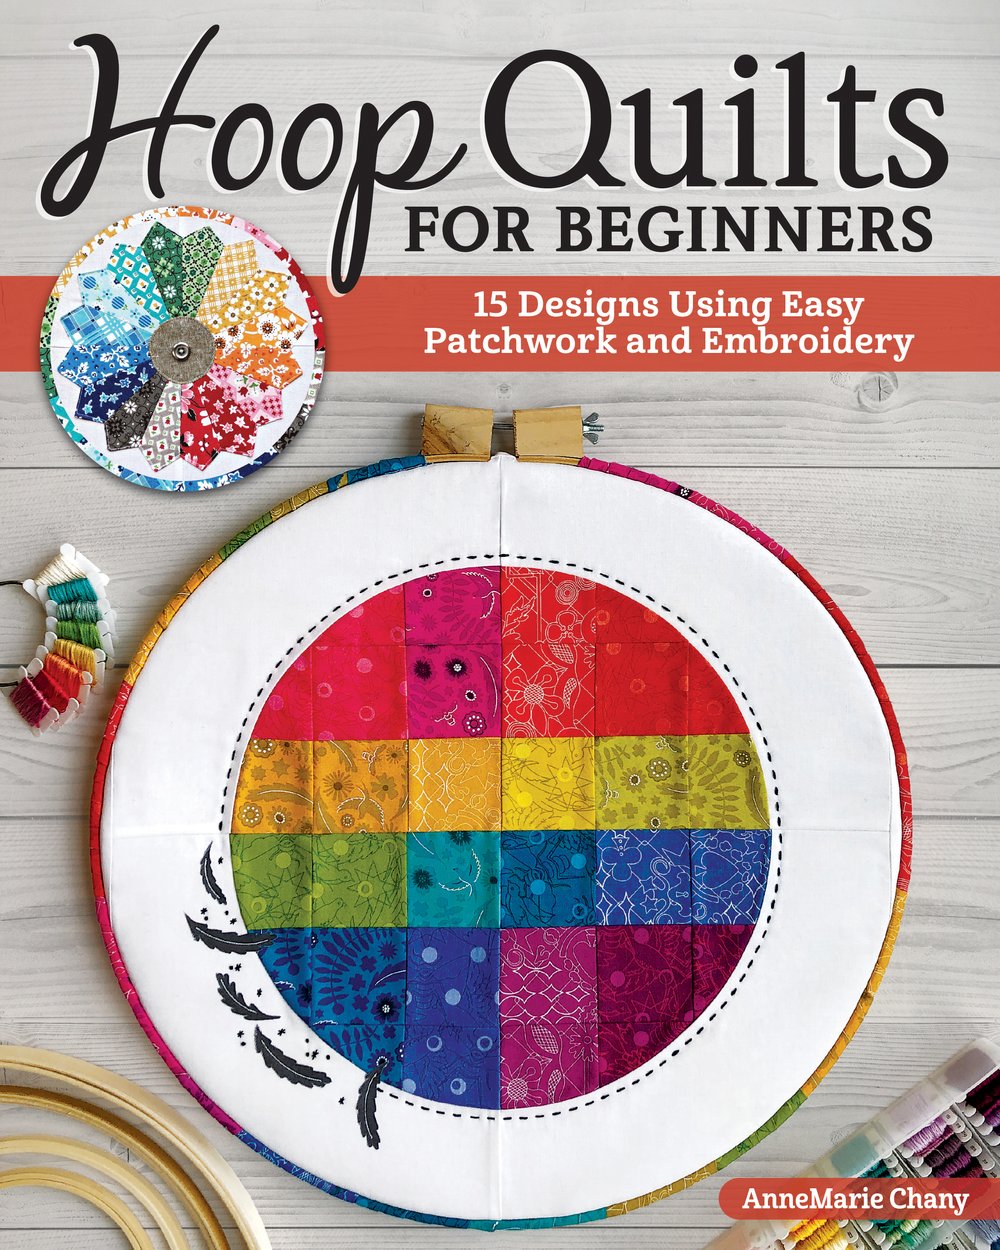 Hoop Quilts for Beginners Book by AnneMarie Chany — AnneMarie Chany Quilt  Patterns